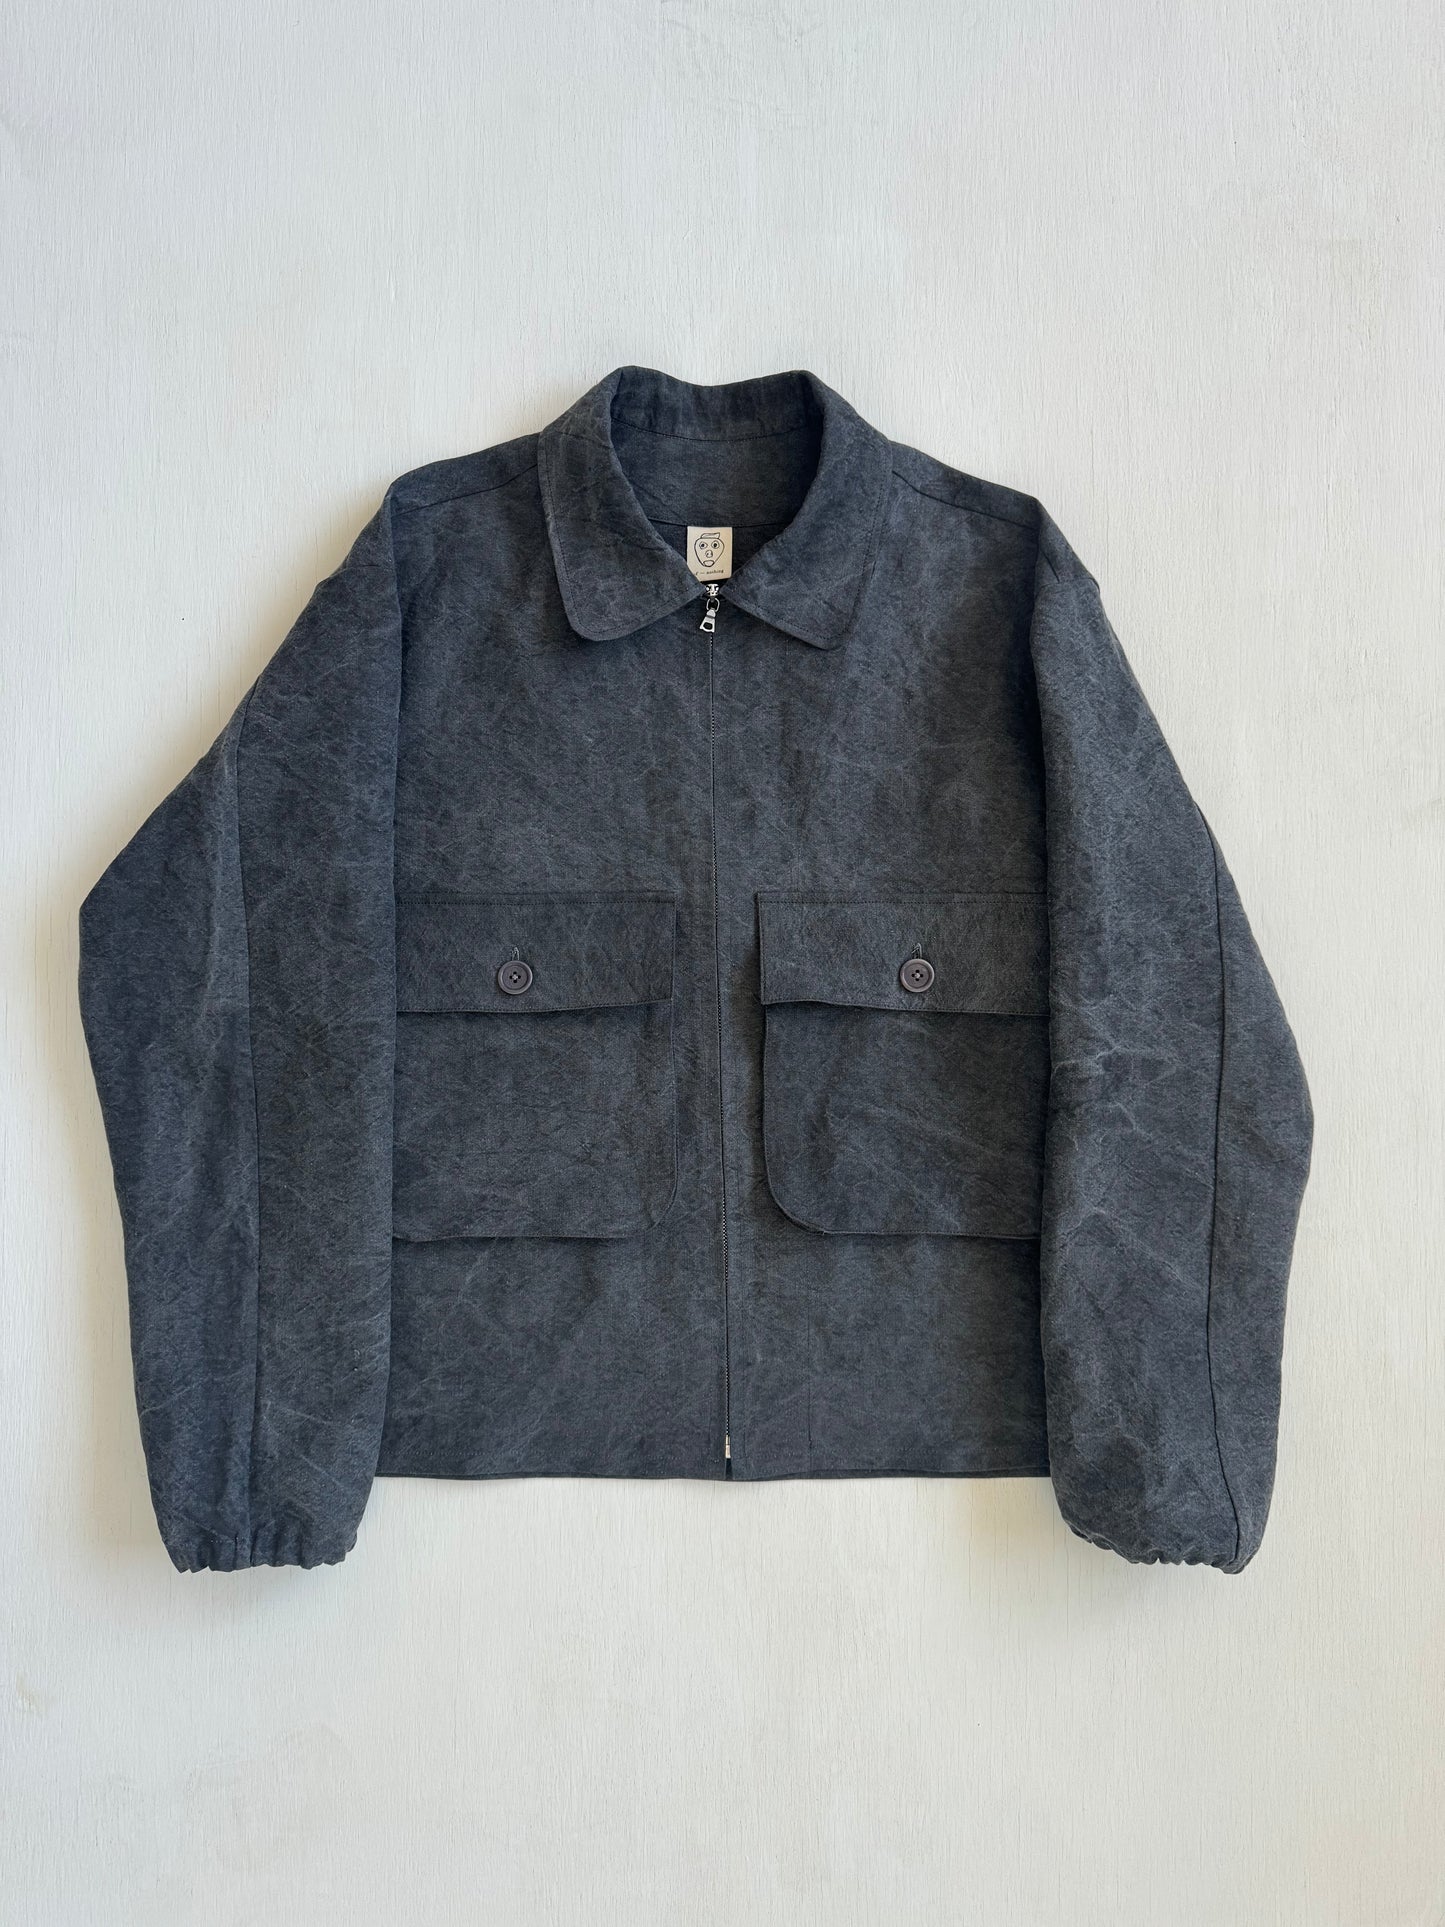 Fishing Jacket in Charcoal Dyed Paper/Linen